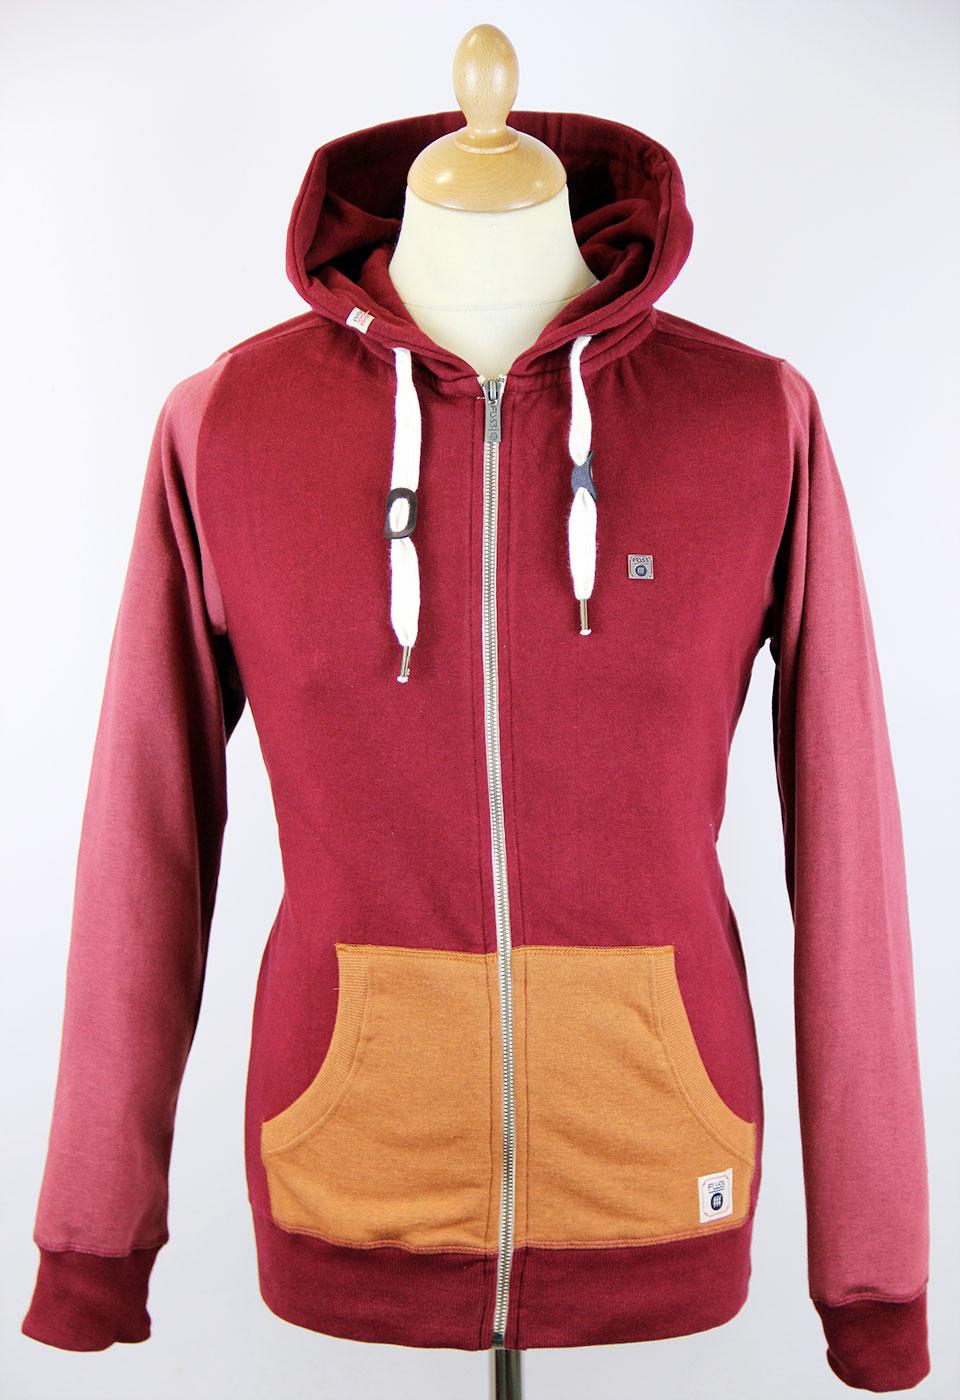 Exit Strategy FLY53 Retro Block Colour Hooded Top